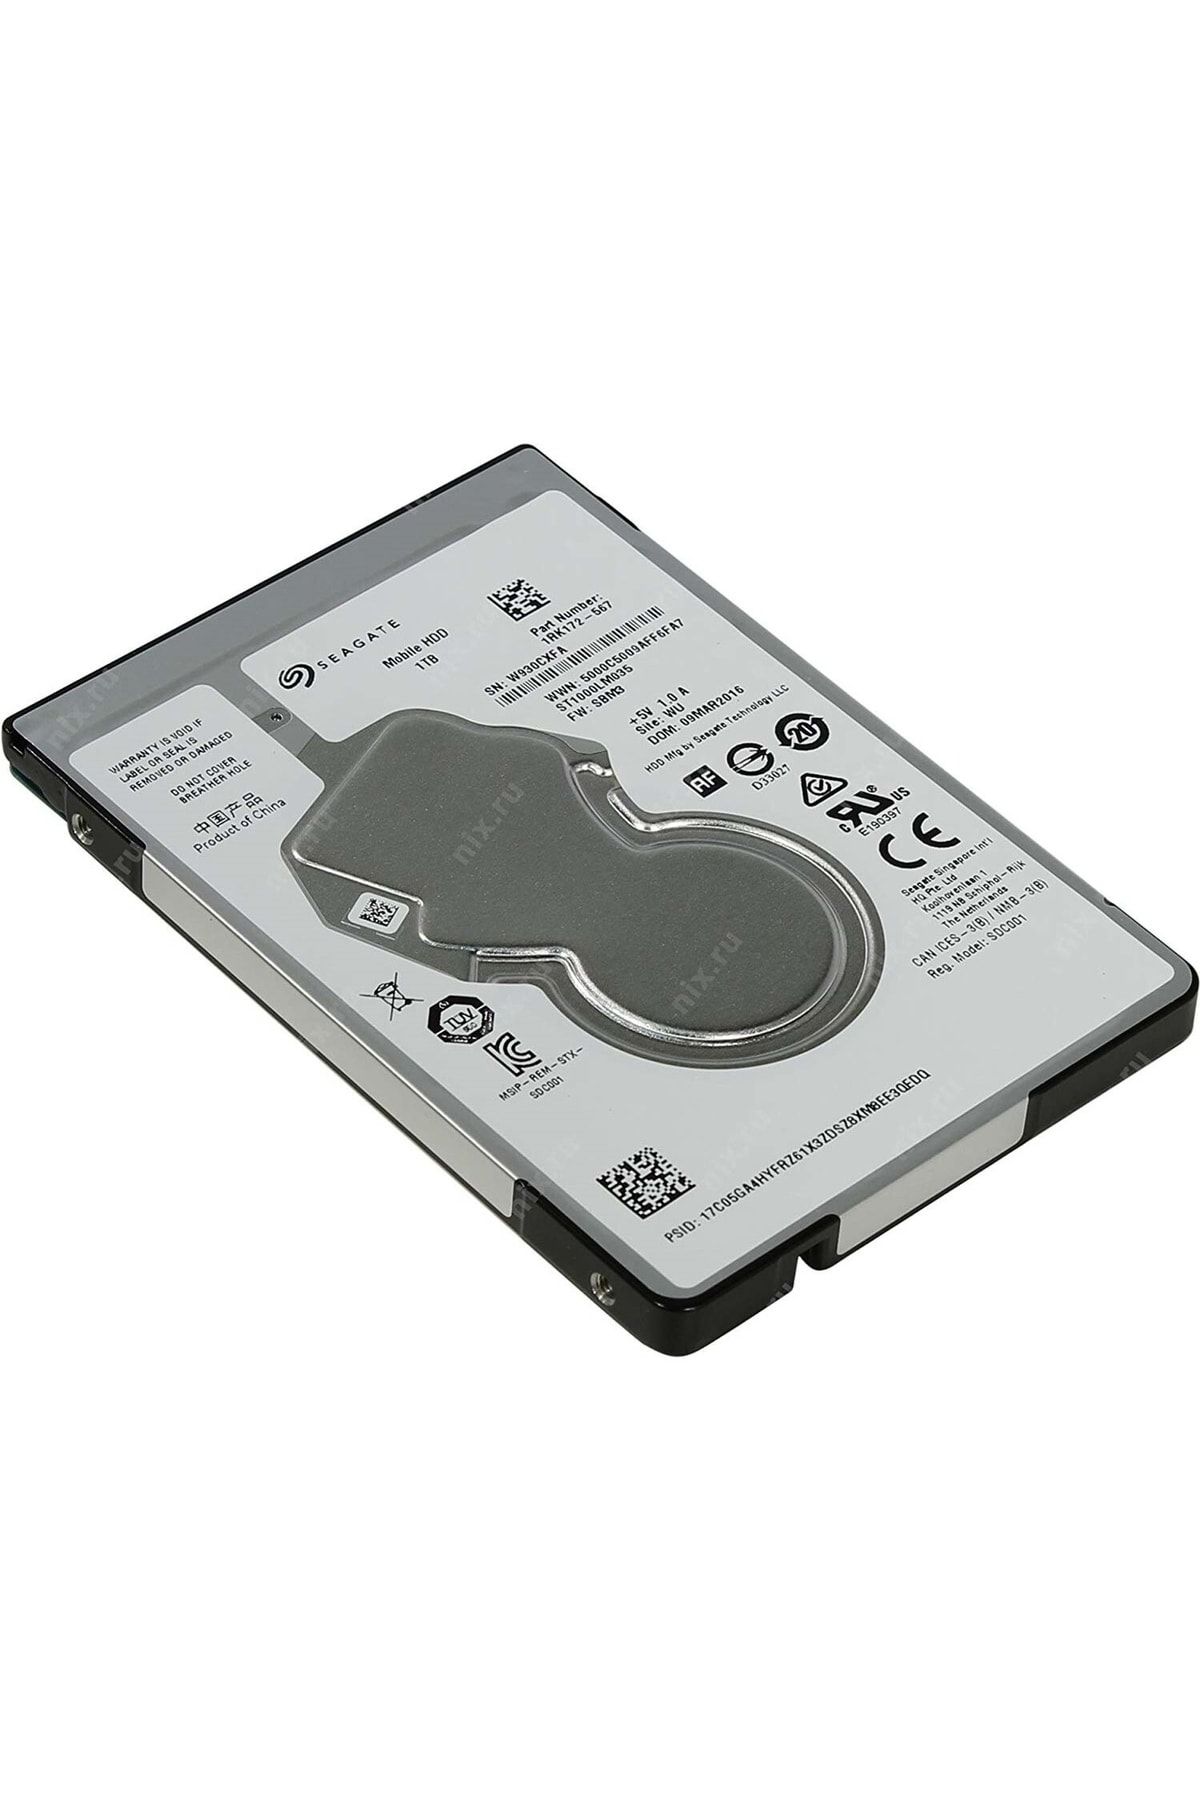 SEAGETE Seagate 2.5 1tb 128mb 5400rpm 7mm St1000lm035 Sata 3.0 Notebook Disk